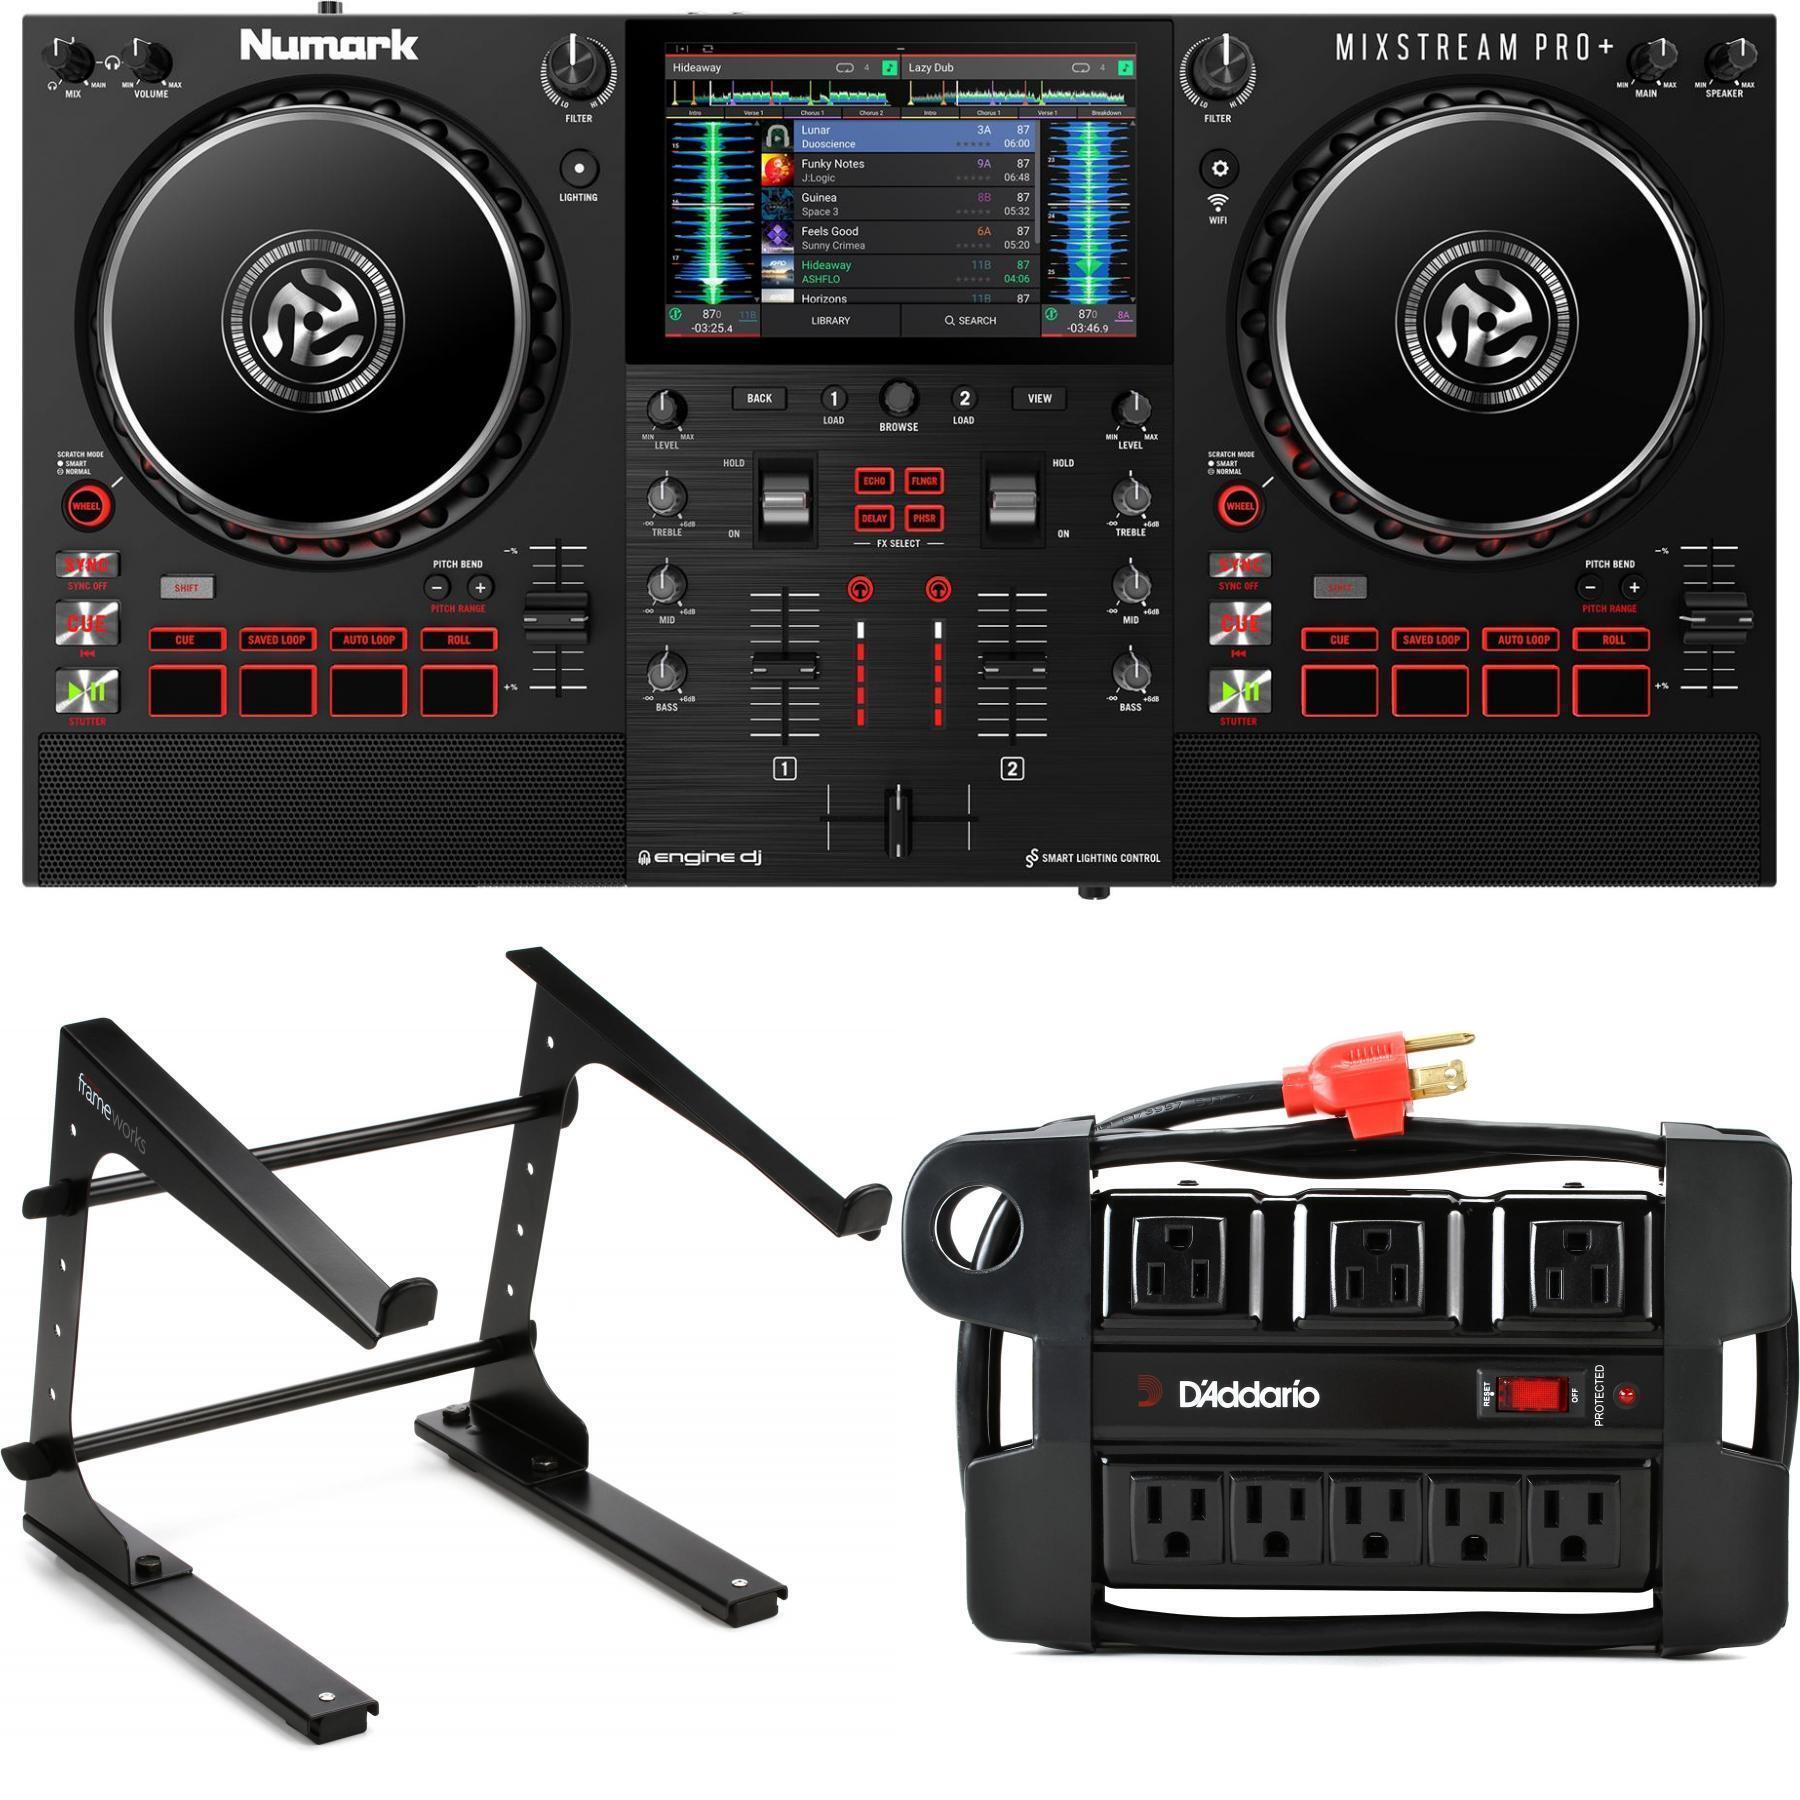 Numark Mixstream Pro + 2-deck Standalone DJ Controller with Laptop Stand  and Power Block